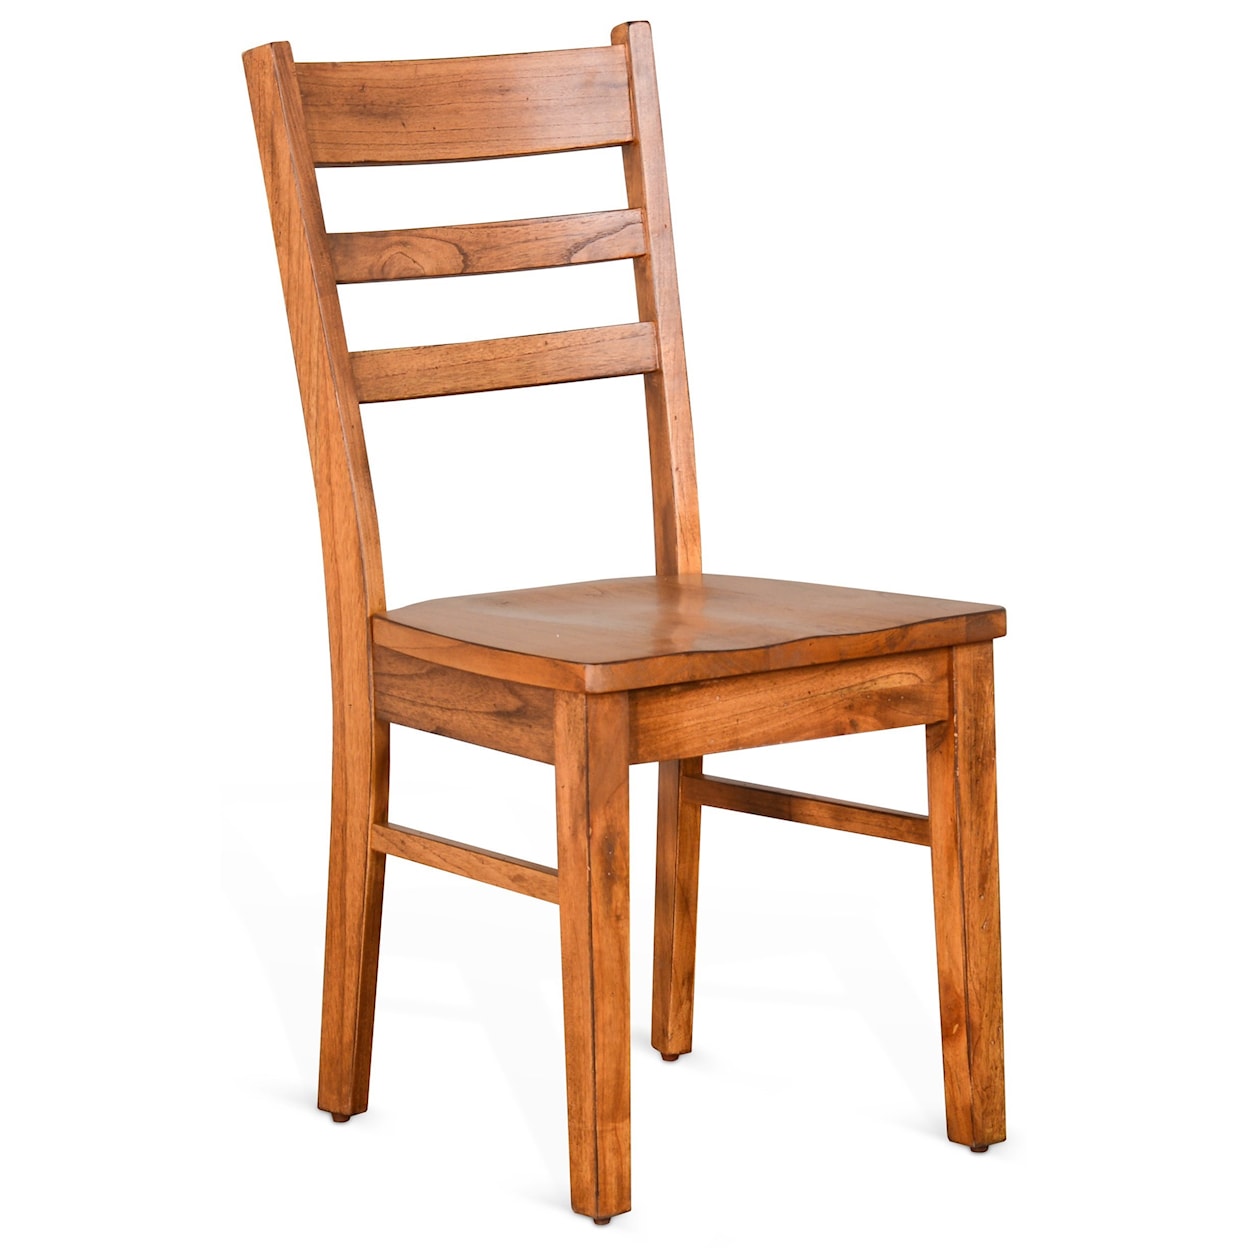 Sunny Designs   Ladderback Chair with Wood Seat